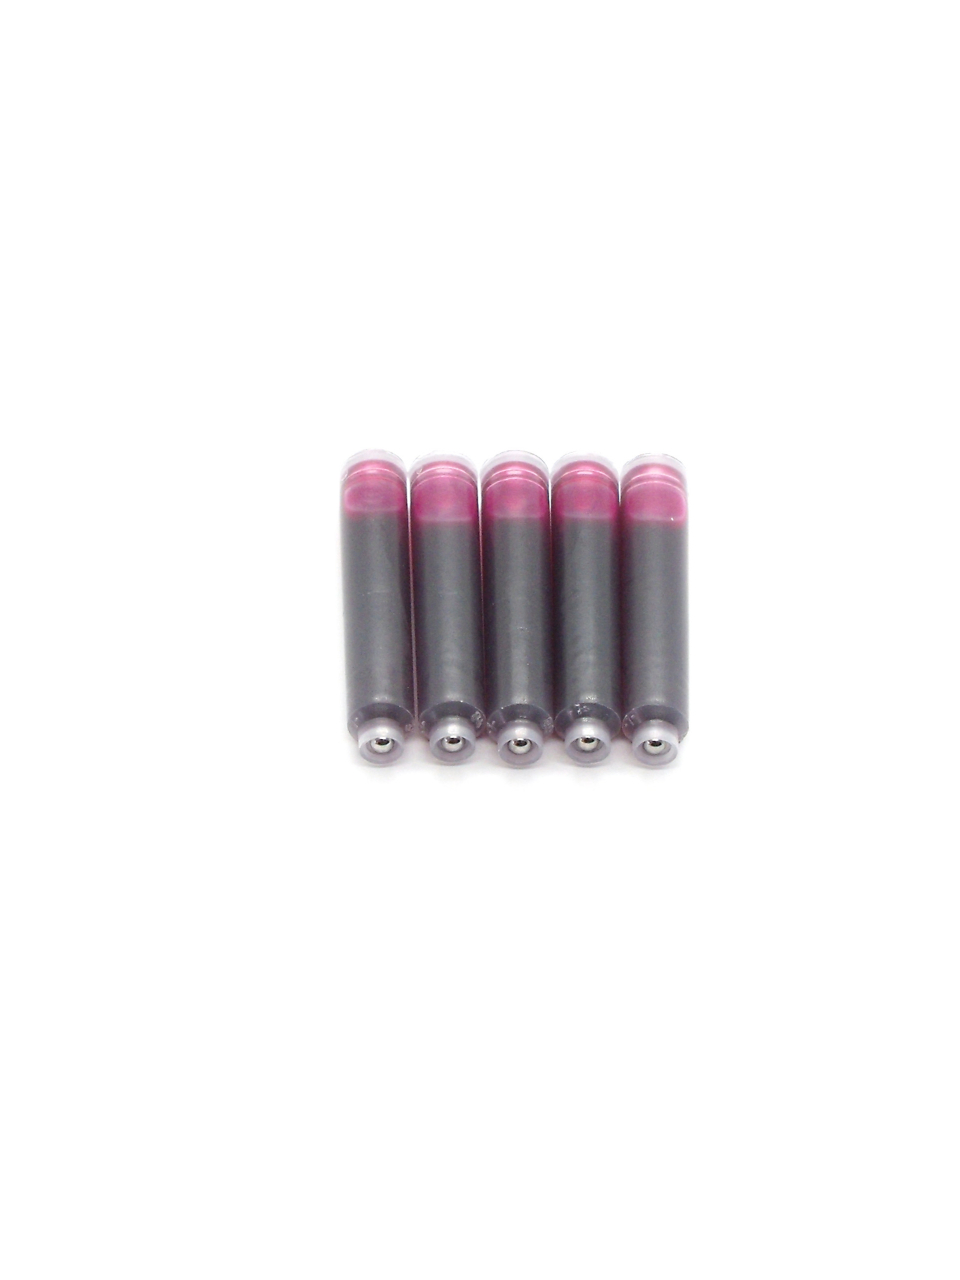 Top Ink Cartridges For Jinhao Fountain Pens (Pink)